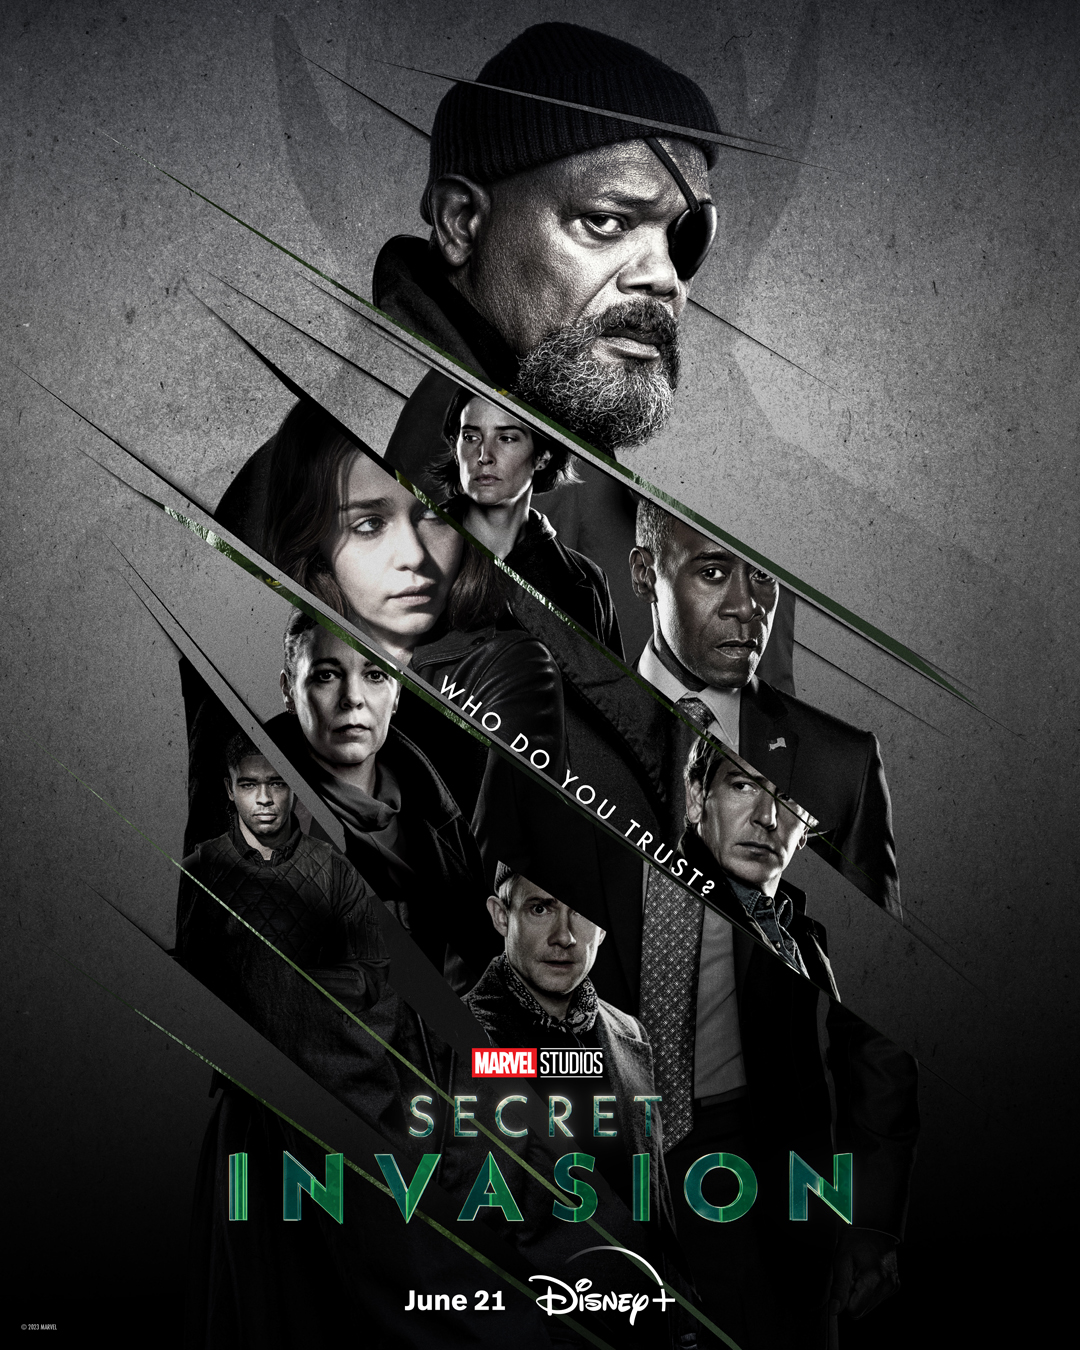 Secret Invasion Poster Features Several Returning Mcu Characters